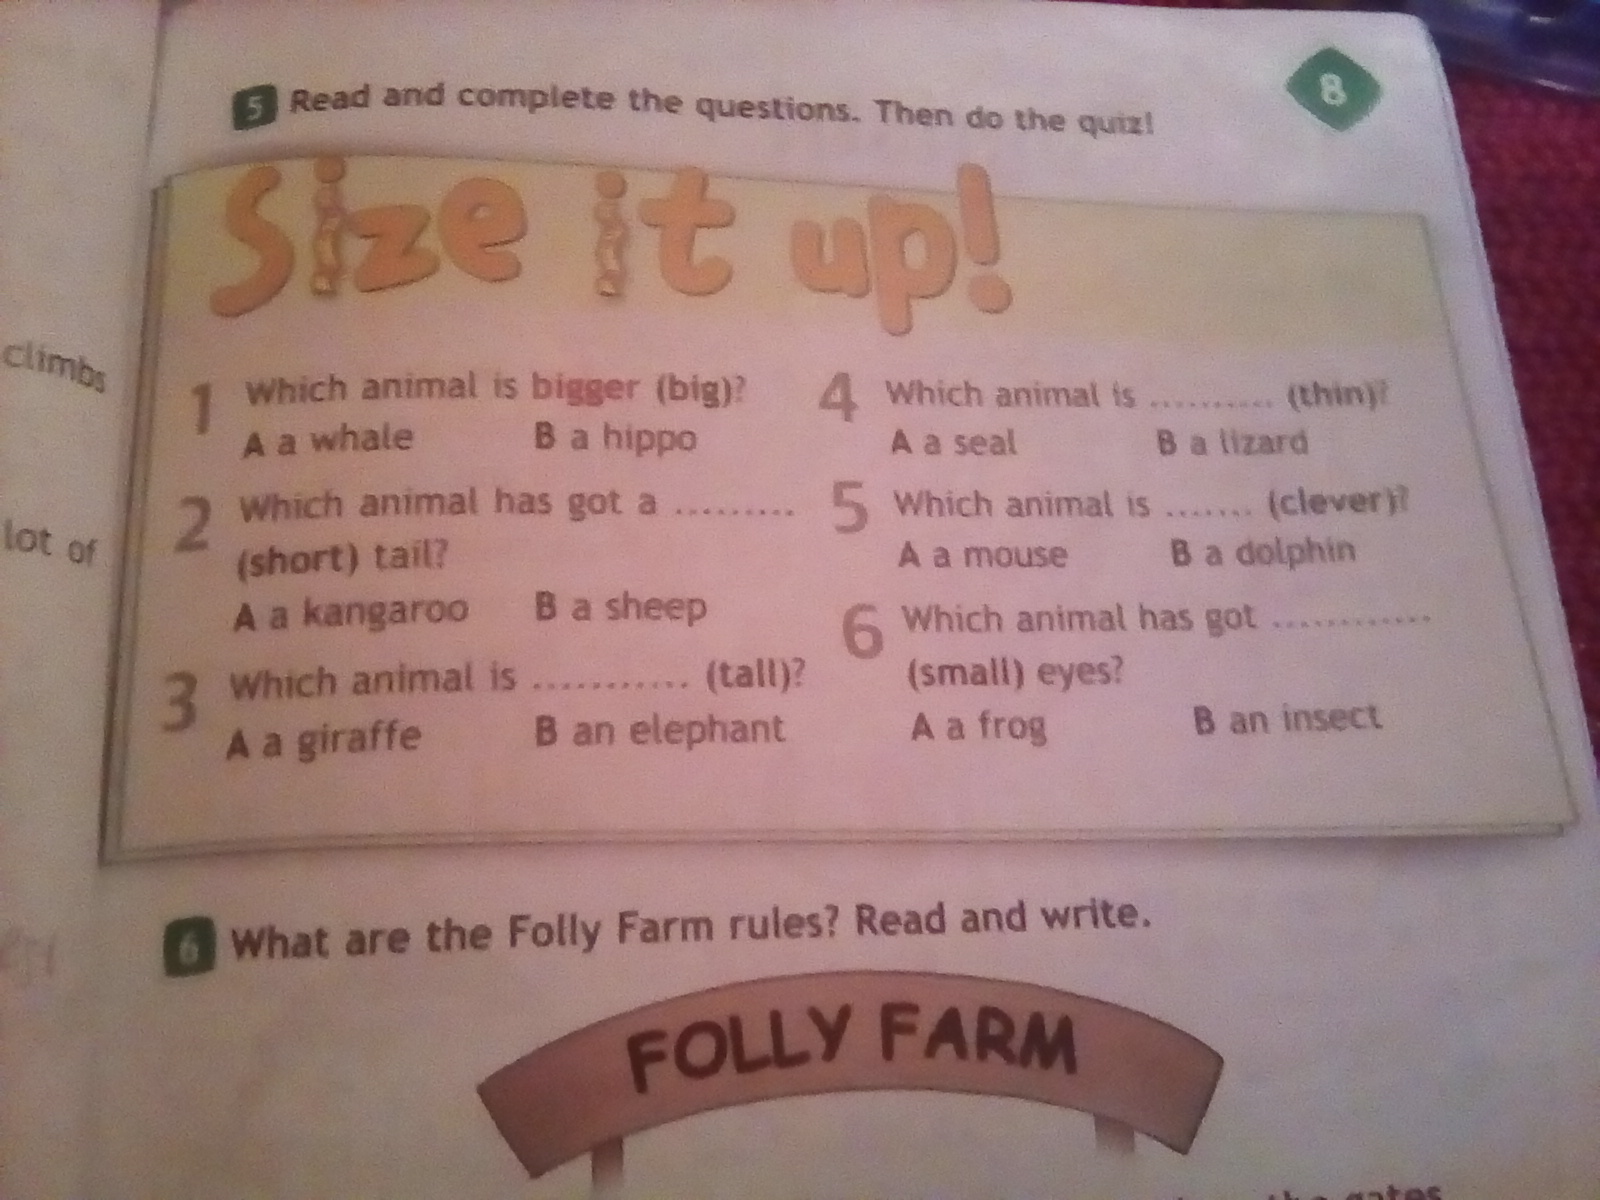 8 complete the questions. Read and complete the questions. Read and complete 4 класс. What are the Folly Farm Rules read and write 4 класс ответы. Read and complete the questions then do the Quiz.